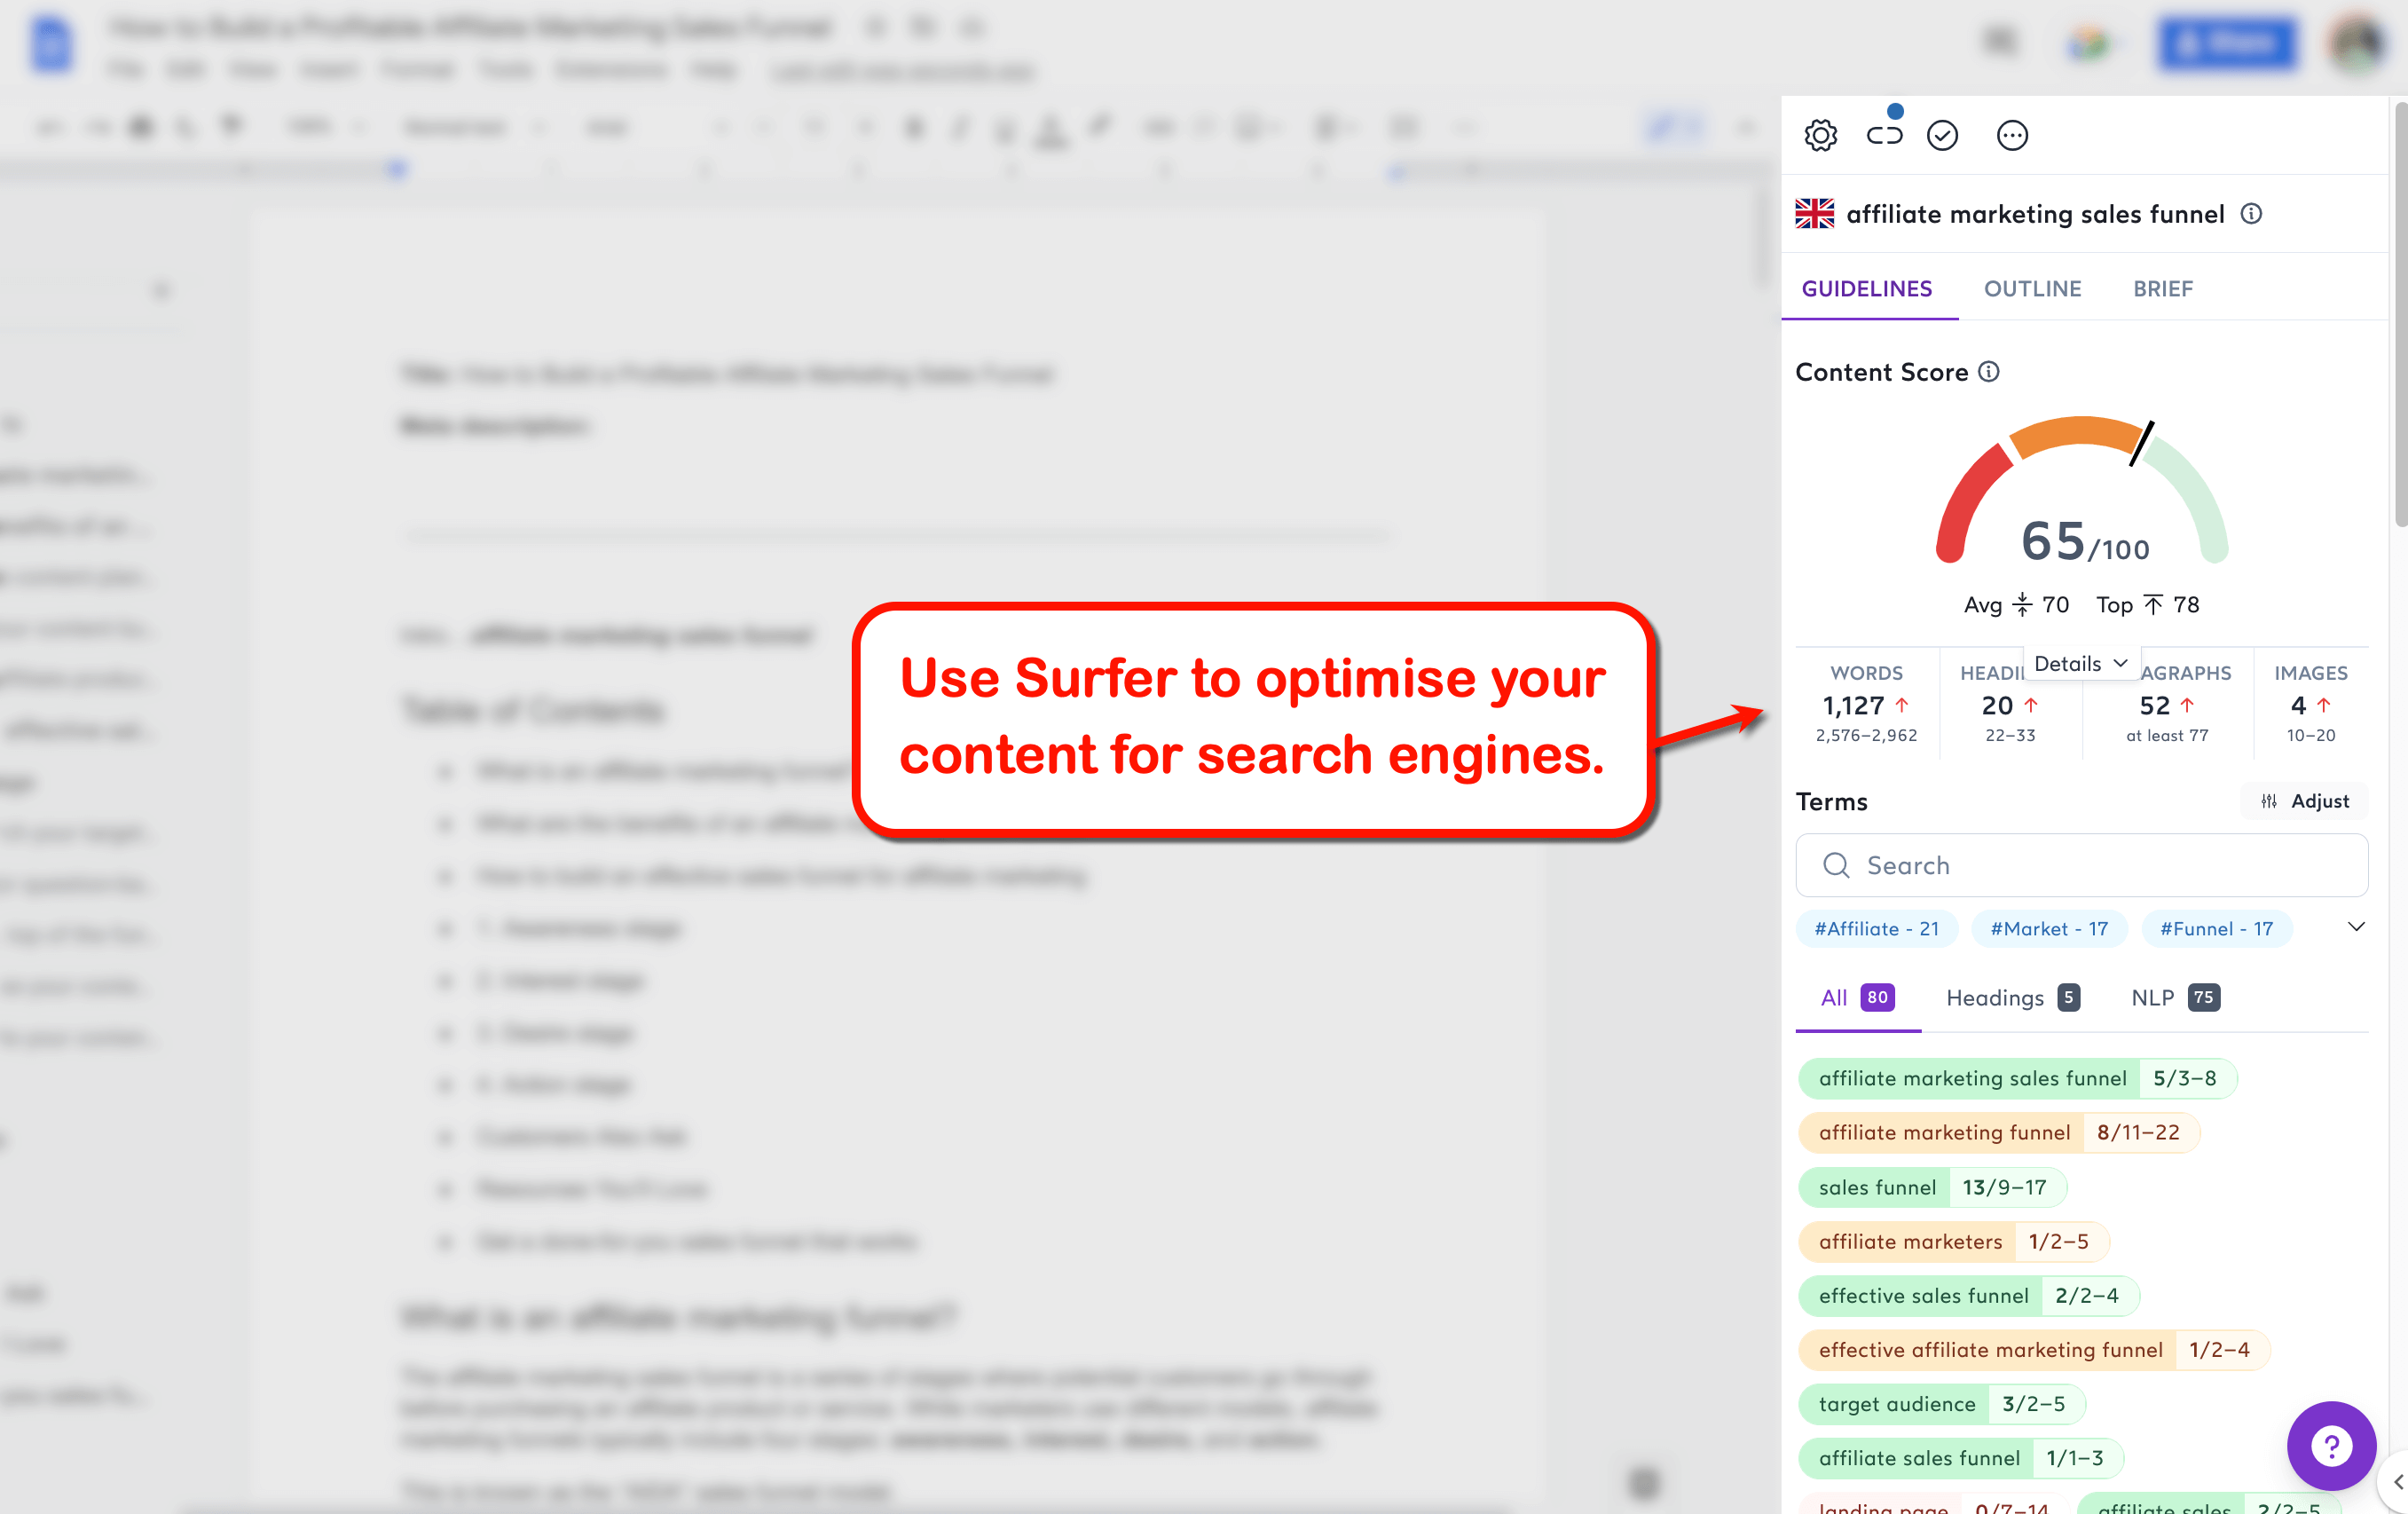 Optimise your content for search with Surfer.